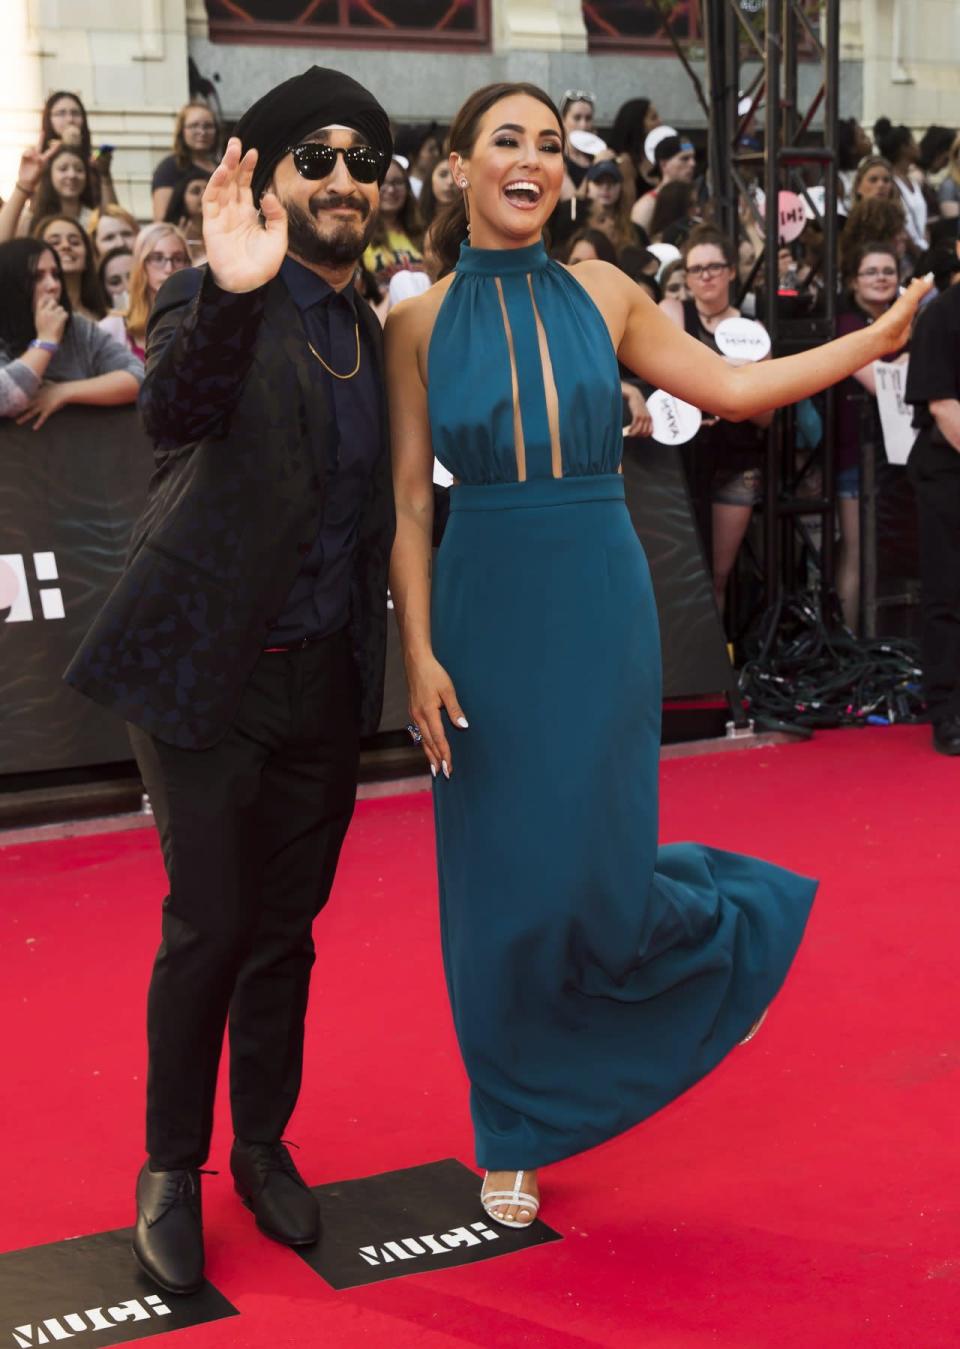 <p>Jus Reign wore a subtley-printed suit jacket while Chloe Wilde looked elegant in a column gown. <i>(THE CANADIAN PRESS/Mark Blinch)</i><br></p>